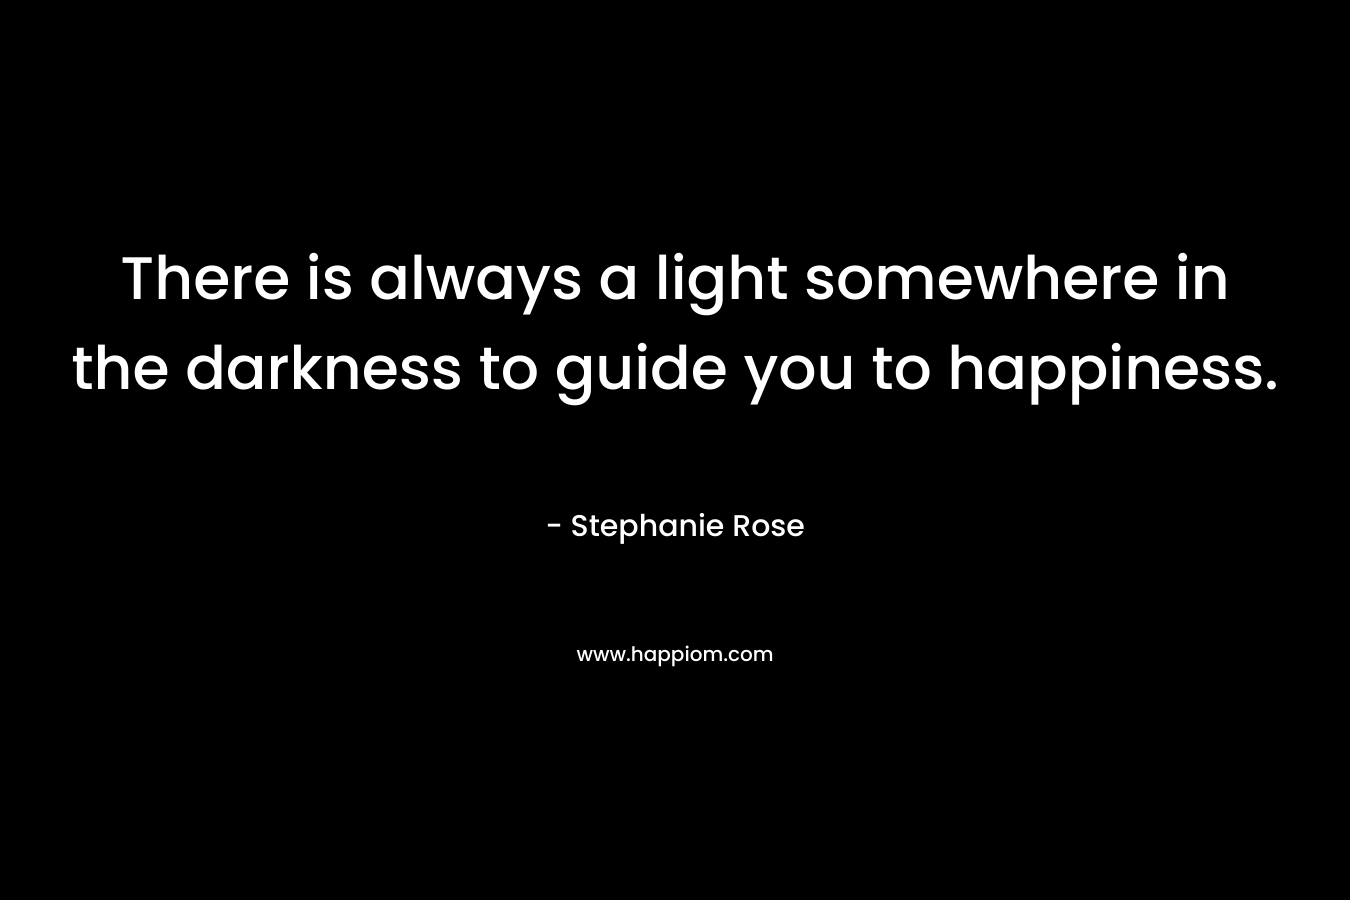 There is always a light somewhere in the darkness to guide you to happiness.